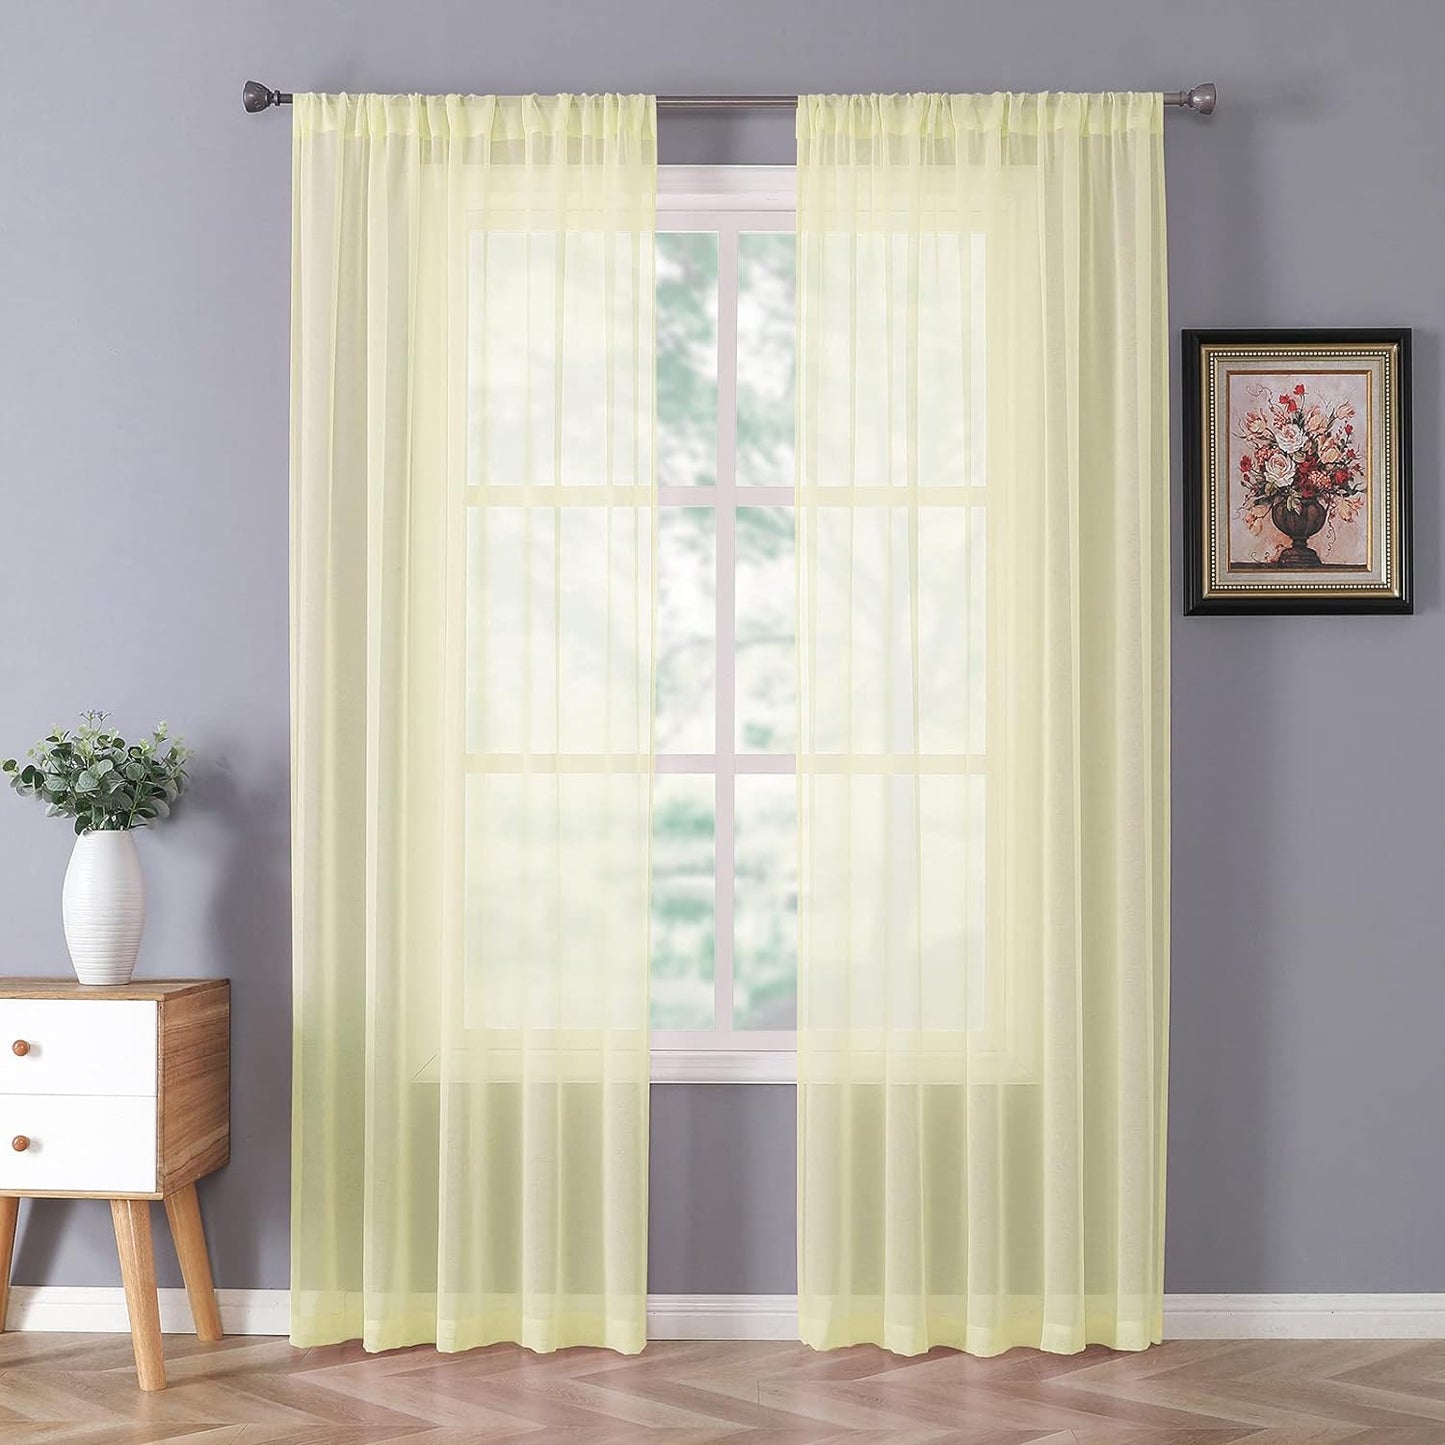 Tollpiz Short Sheer Curtains Linen Textured Bedroom Curtain Sheers Light Filtering Rod Pocket Voile Curtains for Living Room, 54 X 45 Inches Long, White, Set of 2 Panels  Tollpiz Tex Transparent Yellow 54"W X 72"L 